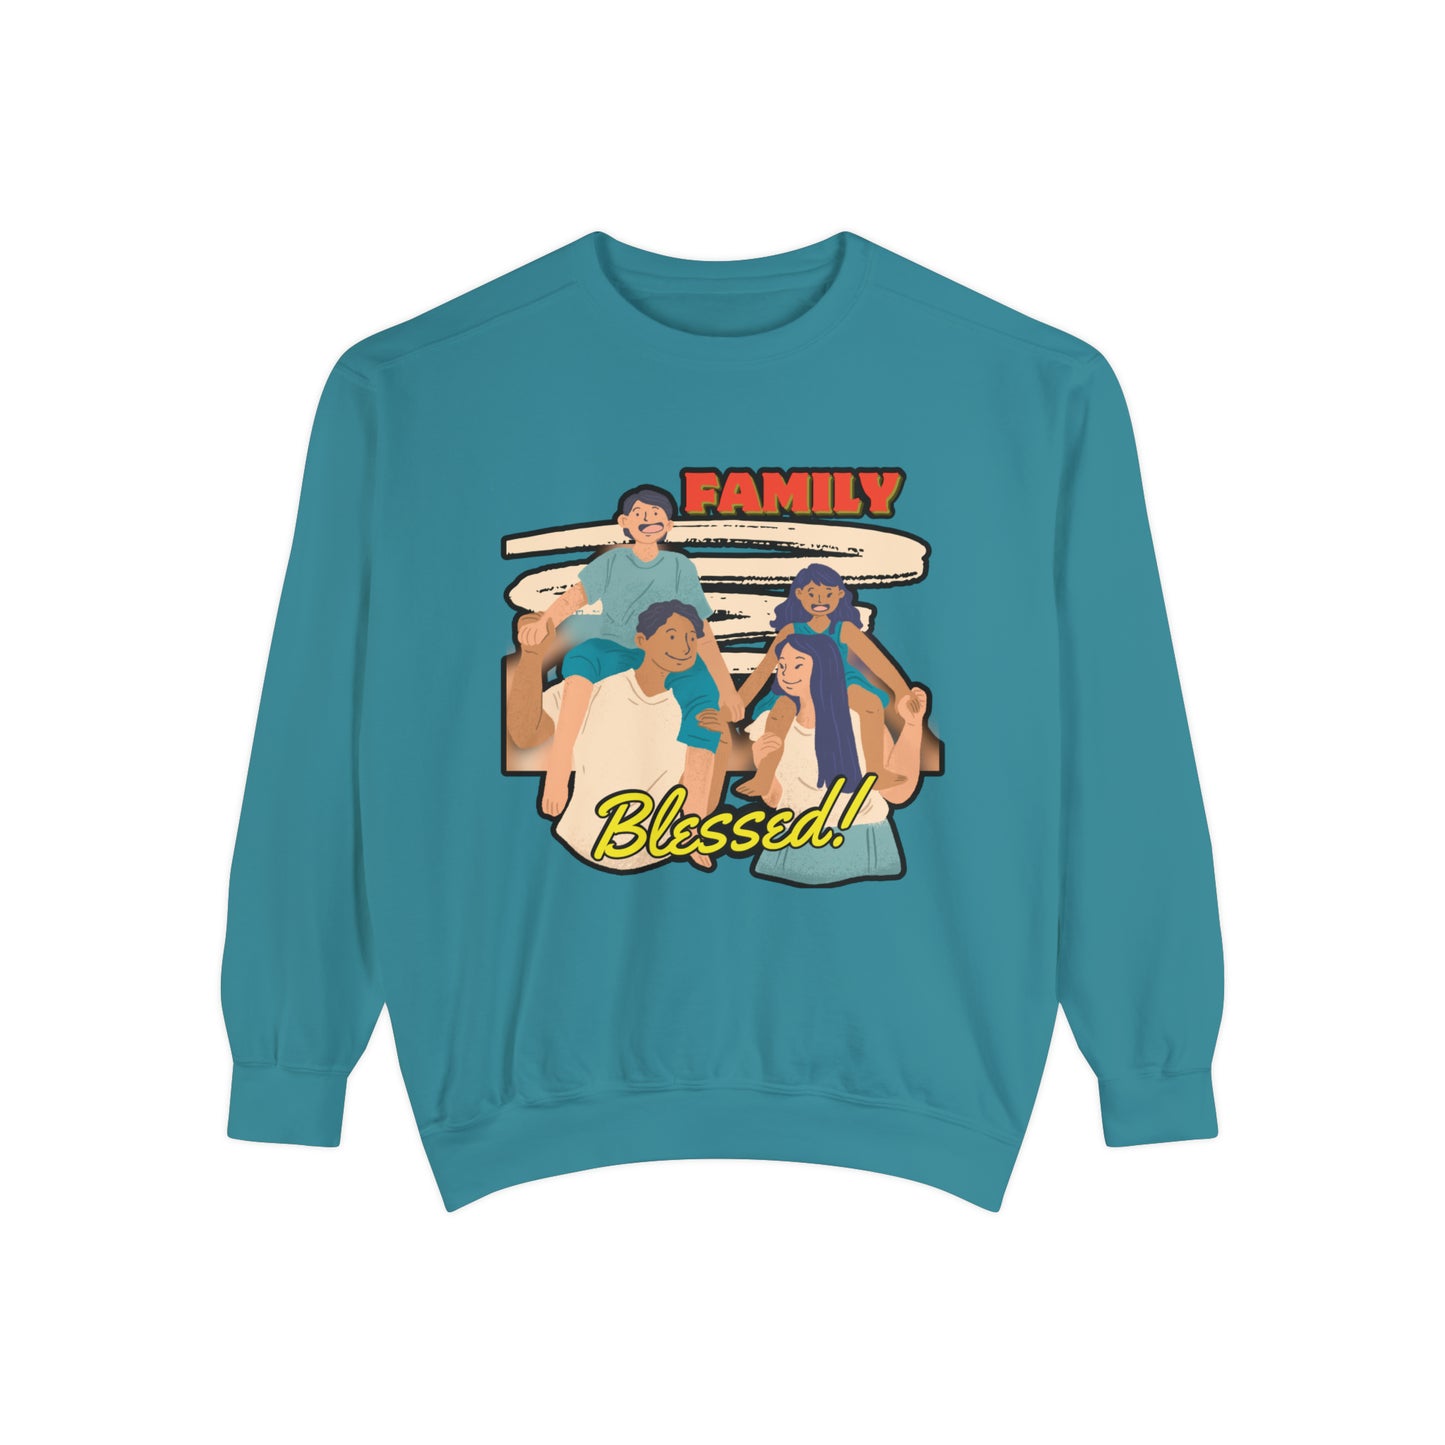 Family Unity: Must-Have Family Blessed Unisex Garment-Dyed Sweatshirt for Cherished Moments!